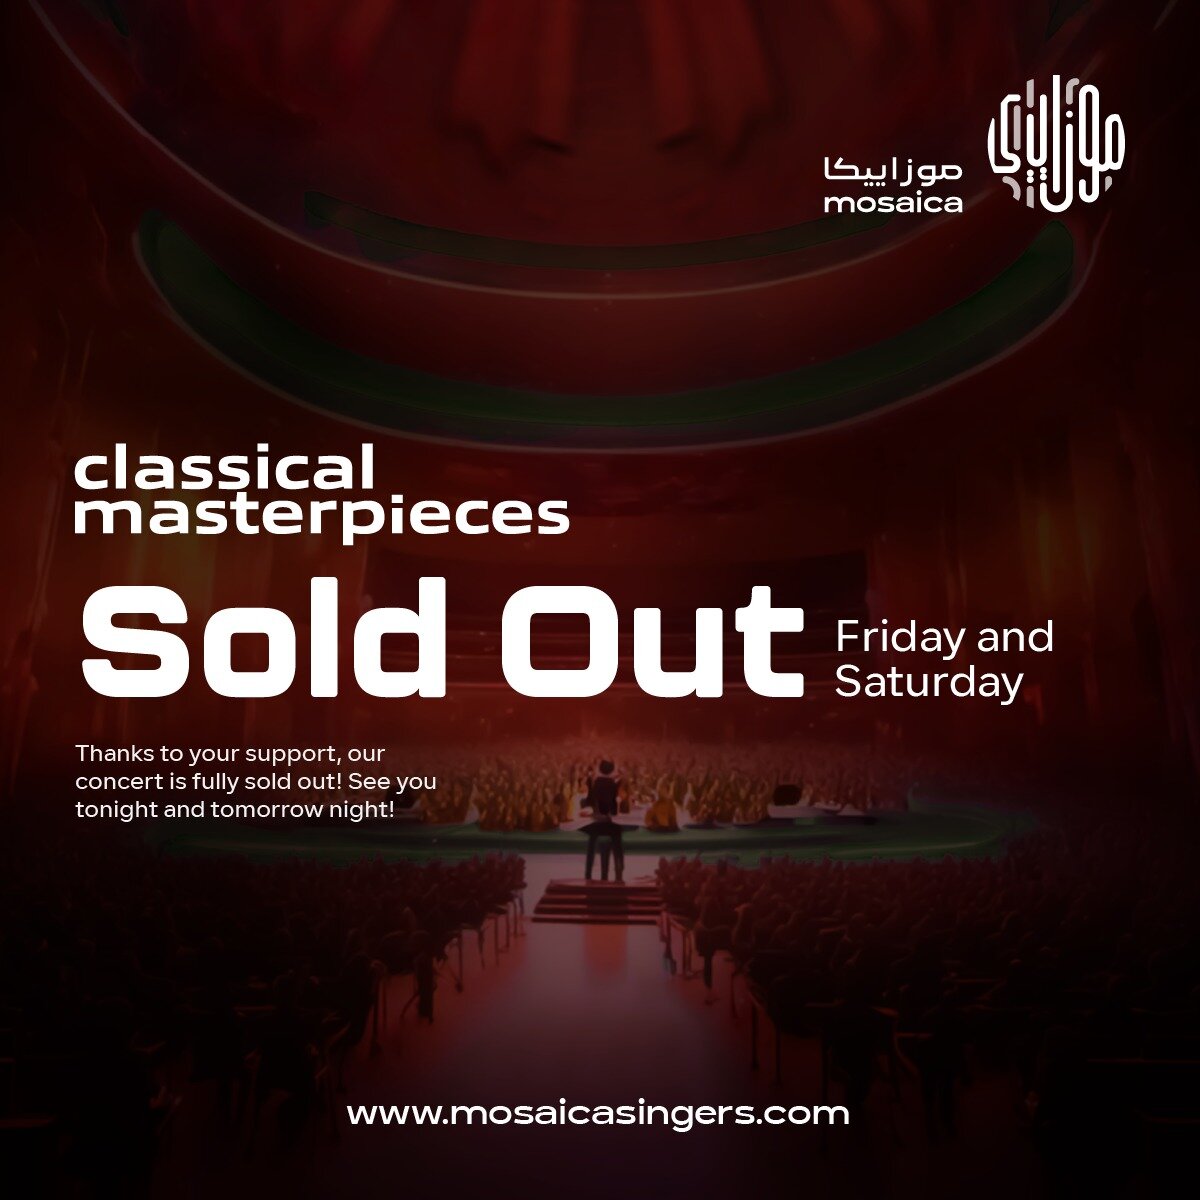 And we are officially SOLD OUT for both nights! Thank you to everyone who supported us. See you soon ❤️❤️

التذاكر لليومين خلصوا! شكرا لكل حدا دعمنا. منشوفكم ❤️❤️

#MosaicaSingers #جوقة_موزاييكا #روائع_كلاسيكية
#mosaicasingsclassicalmasterpieces